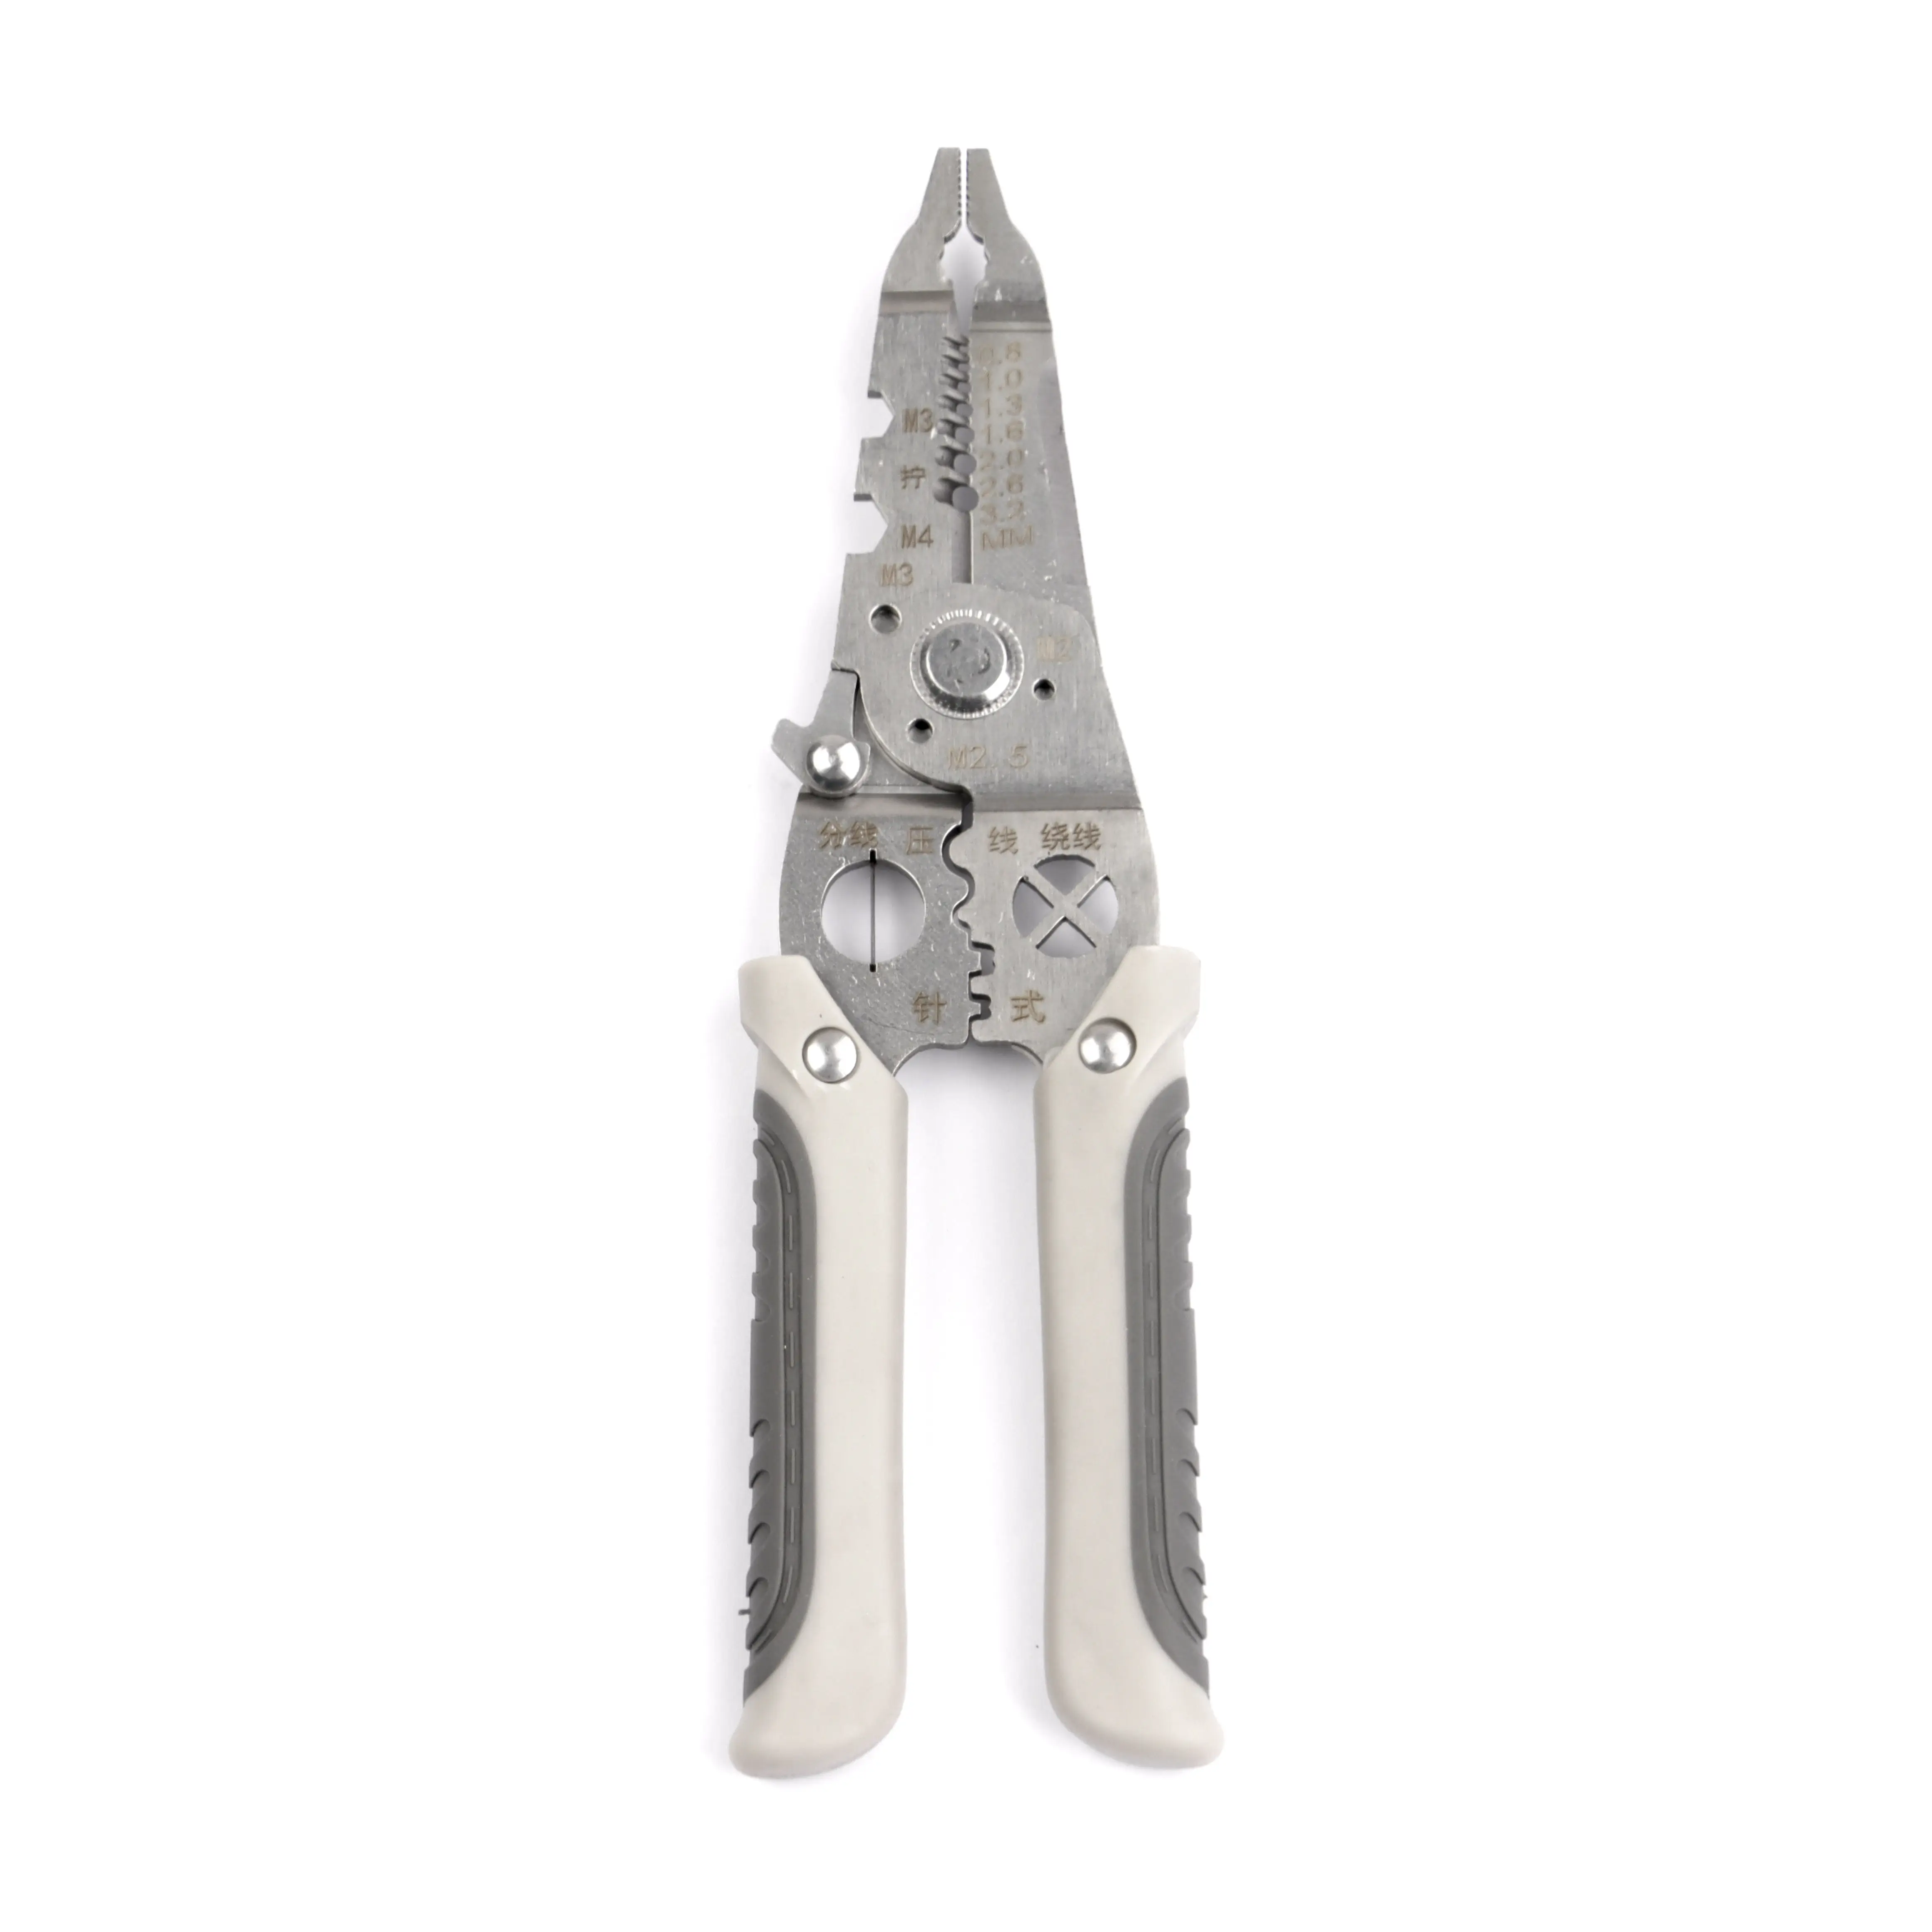 Hot Sale 21 in 1 Multi-functional Cutting Stripper 8 inch Crimping Wire Tool Stripping Wire Pliers Stripper For Wires